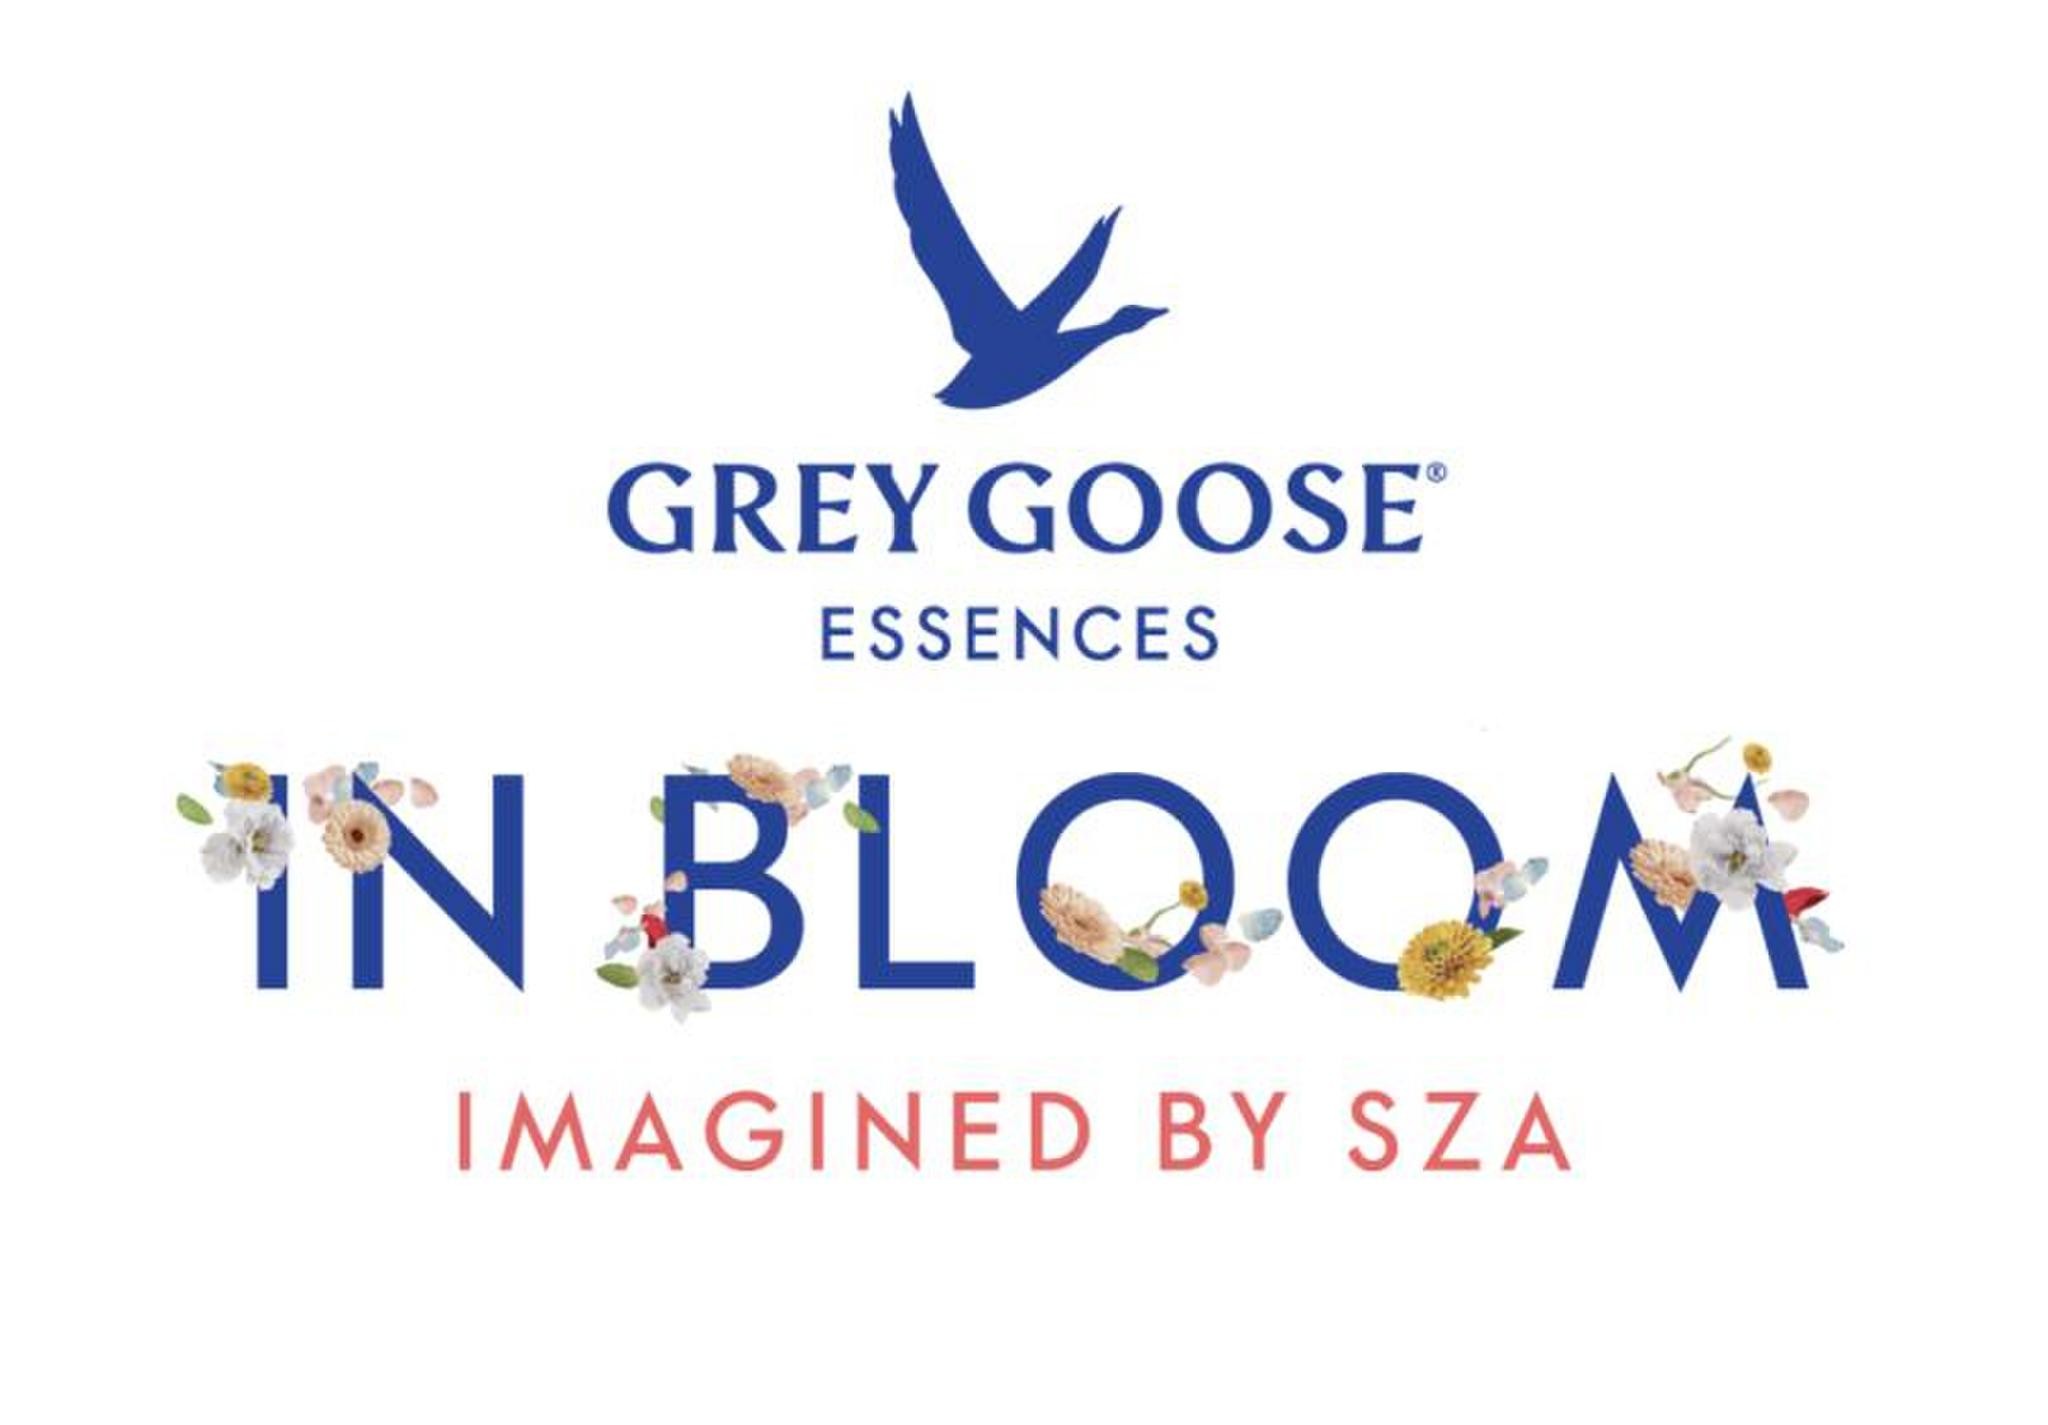 GREY GOOSE Presents: IN BLOOM, by SZA